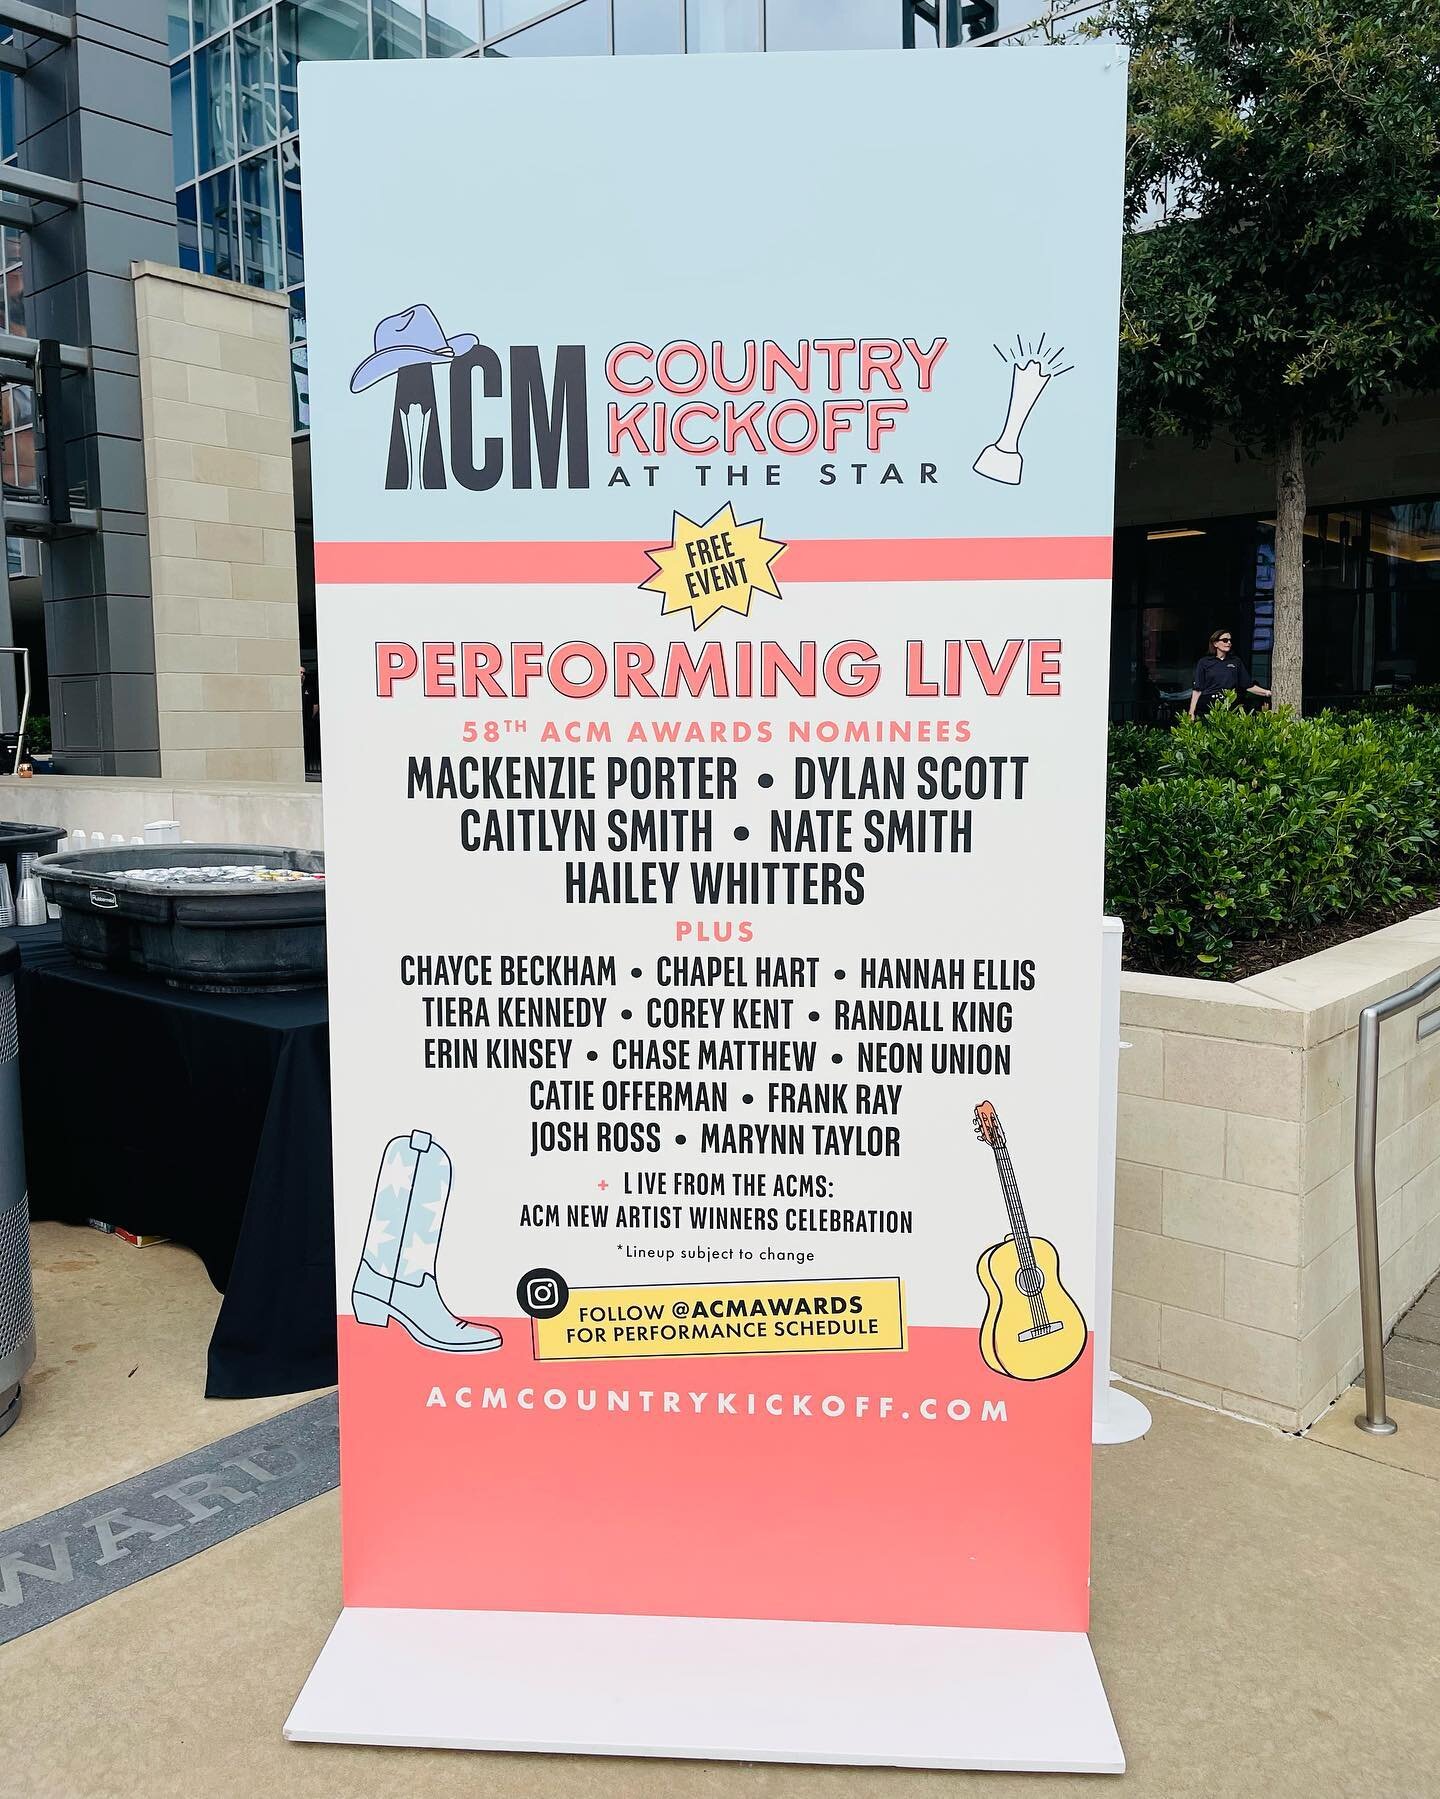 ACM Country Kick-Off at the Star happening NOW!! 🎸✨🎶 Come out to @thestarinfrisco until 10pm and enjoy! @acmawards